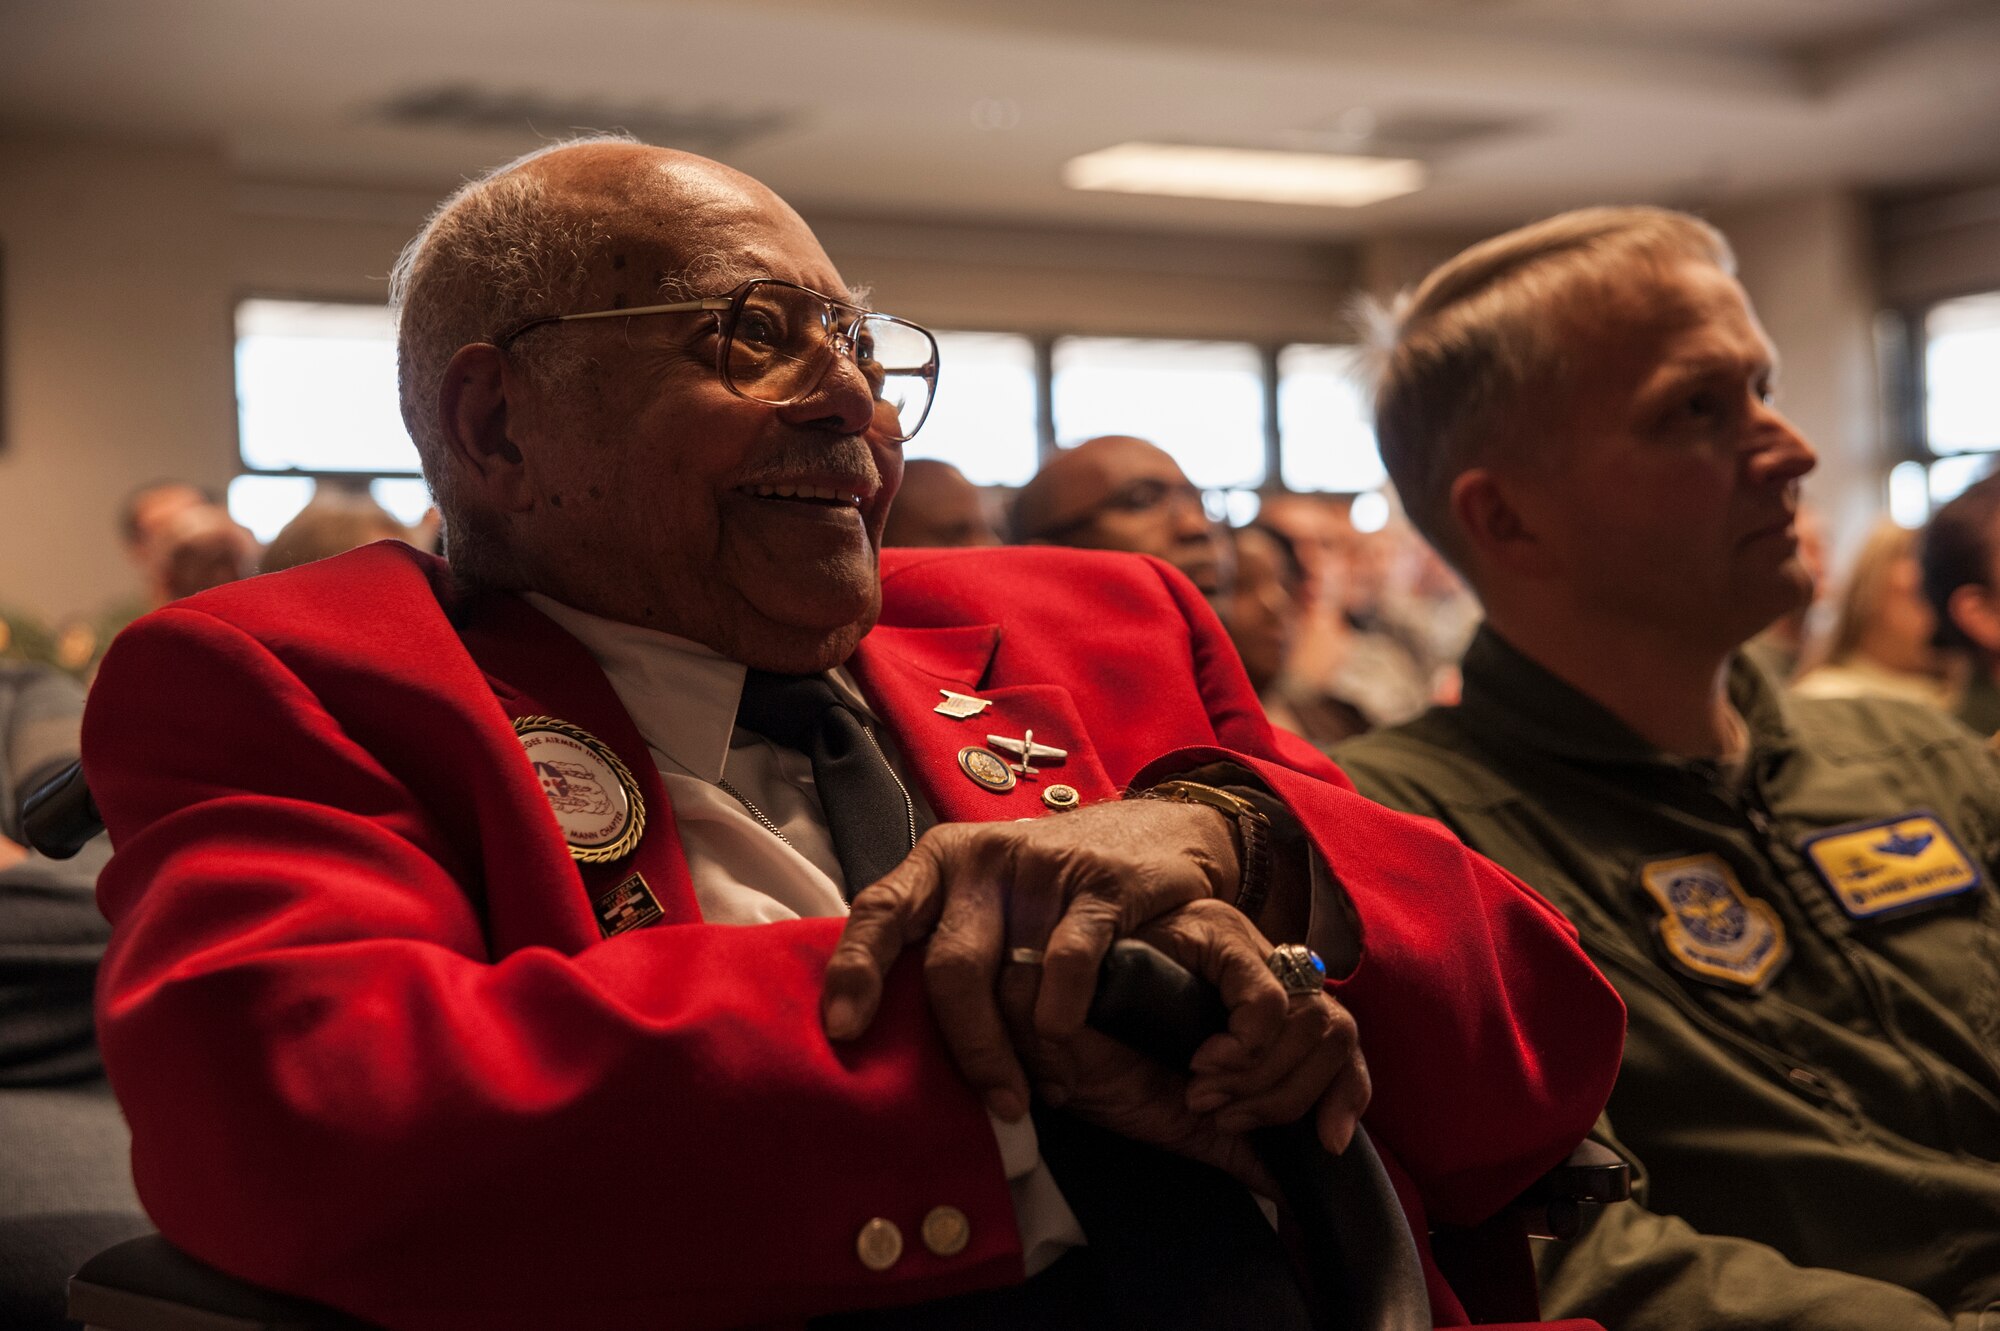 Tuskegee Airman, retired Lt. Col. Hiram Mann, visits the 16th Airlift Squadron Nov. 2, 2012, at Joint Base Charleston - Air Base, S.C. Entering the Army Air Corps as a pre-aviation student in 1942, Mann was assigned to the 100th Fighter Squadron of the 332nd Fighter Group, the Red Tail Angels, in Italy. During his career, Mann flew the P-40 "Warhawk" and the P-47 "Thunderbolt" fighter-type aircraft, and co-piloted the B-25 "Billy Mitchell" bomber, the C-47 "Gooney-bird" and the C-45 "Expediter” cargo planes. (U.S. Air Force photo/Airman 1st Class Ashlee Galloway)